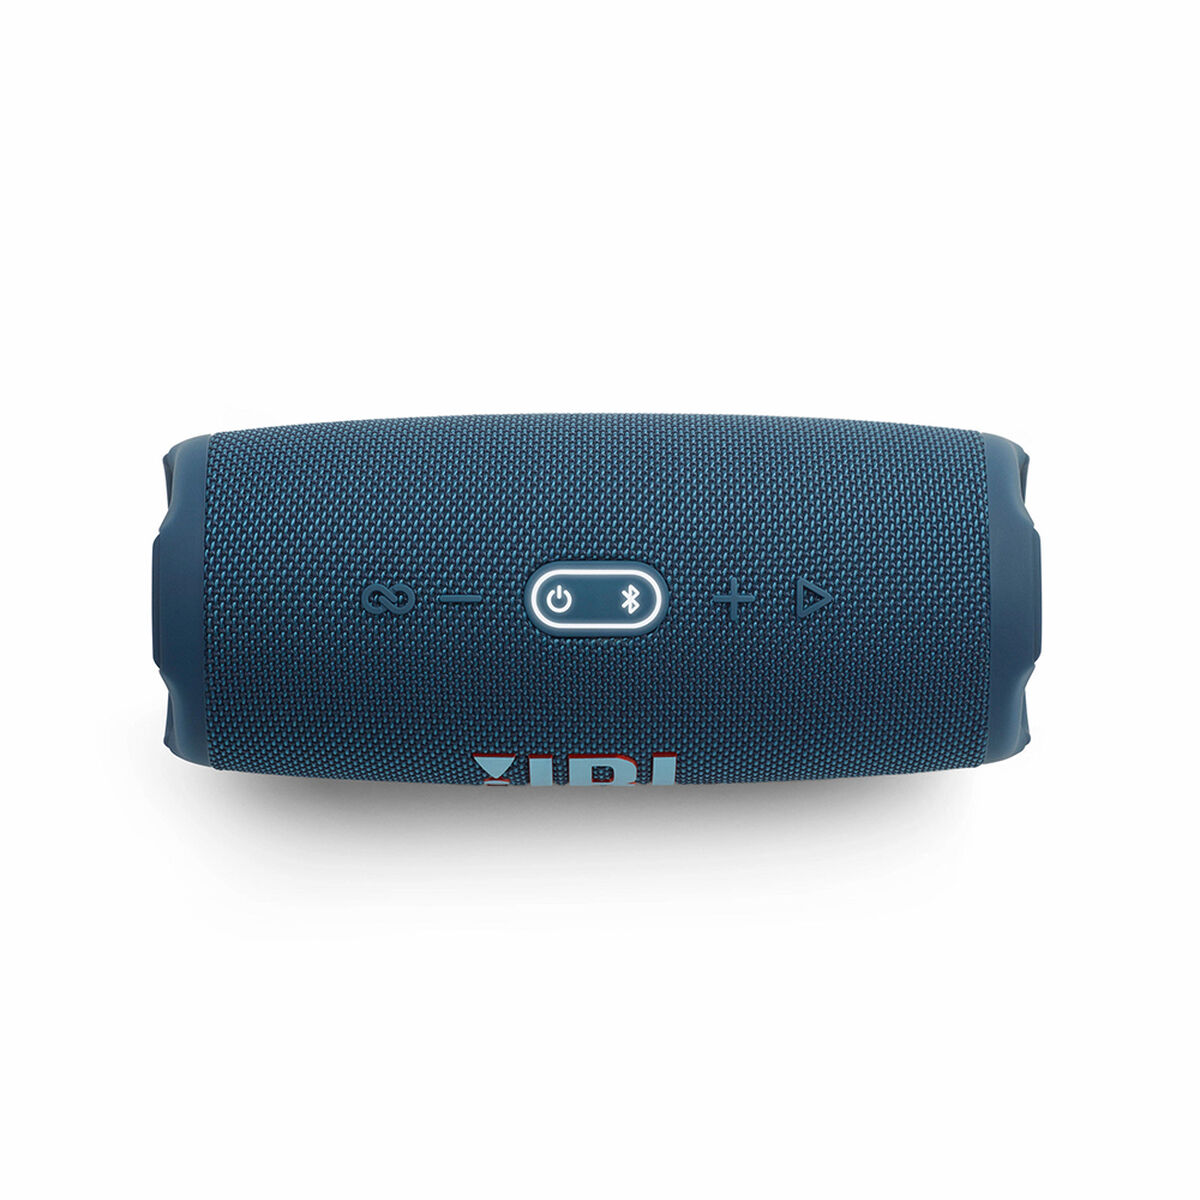 Parlante Bluetooth JBL Charge 5 Azul